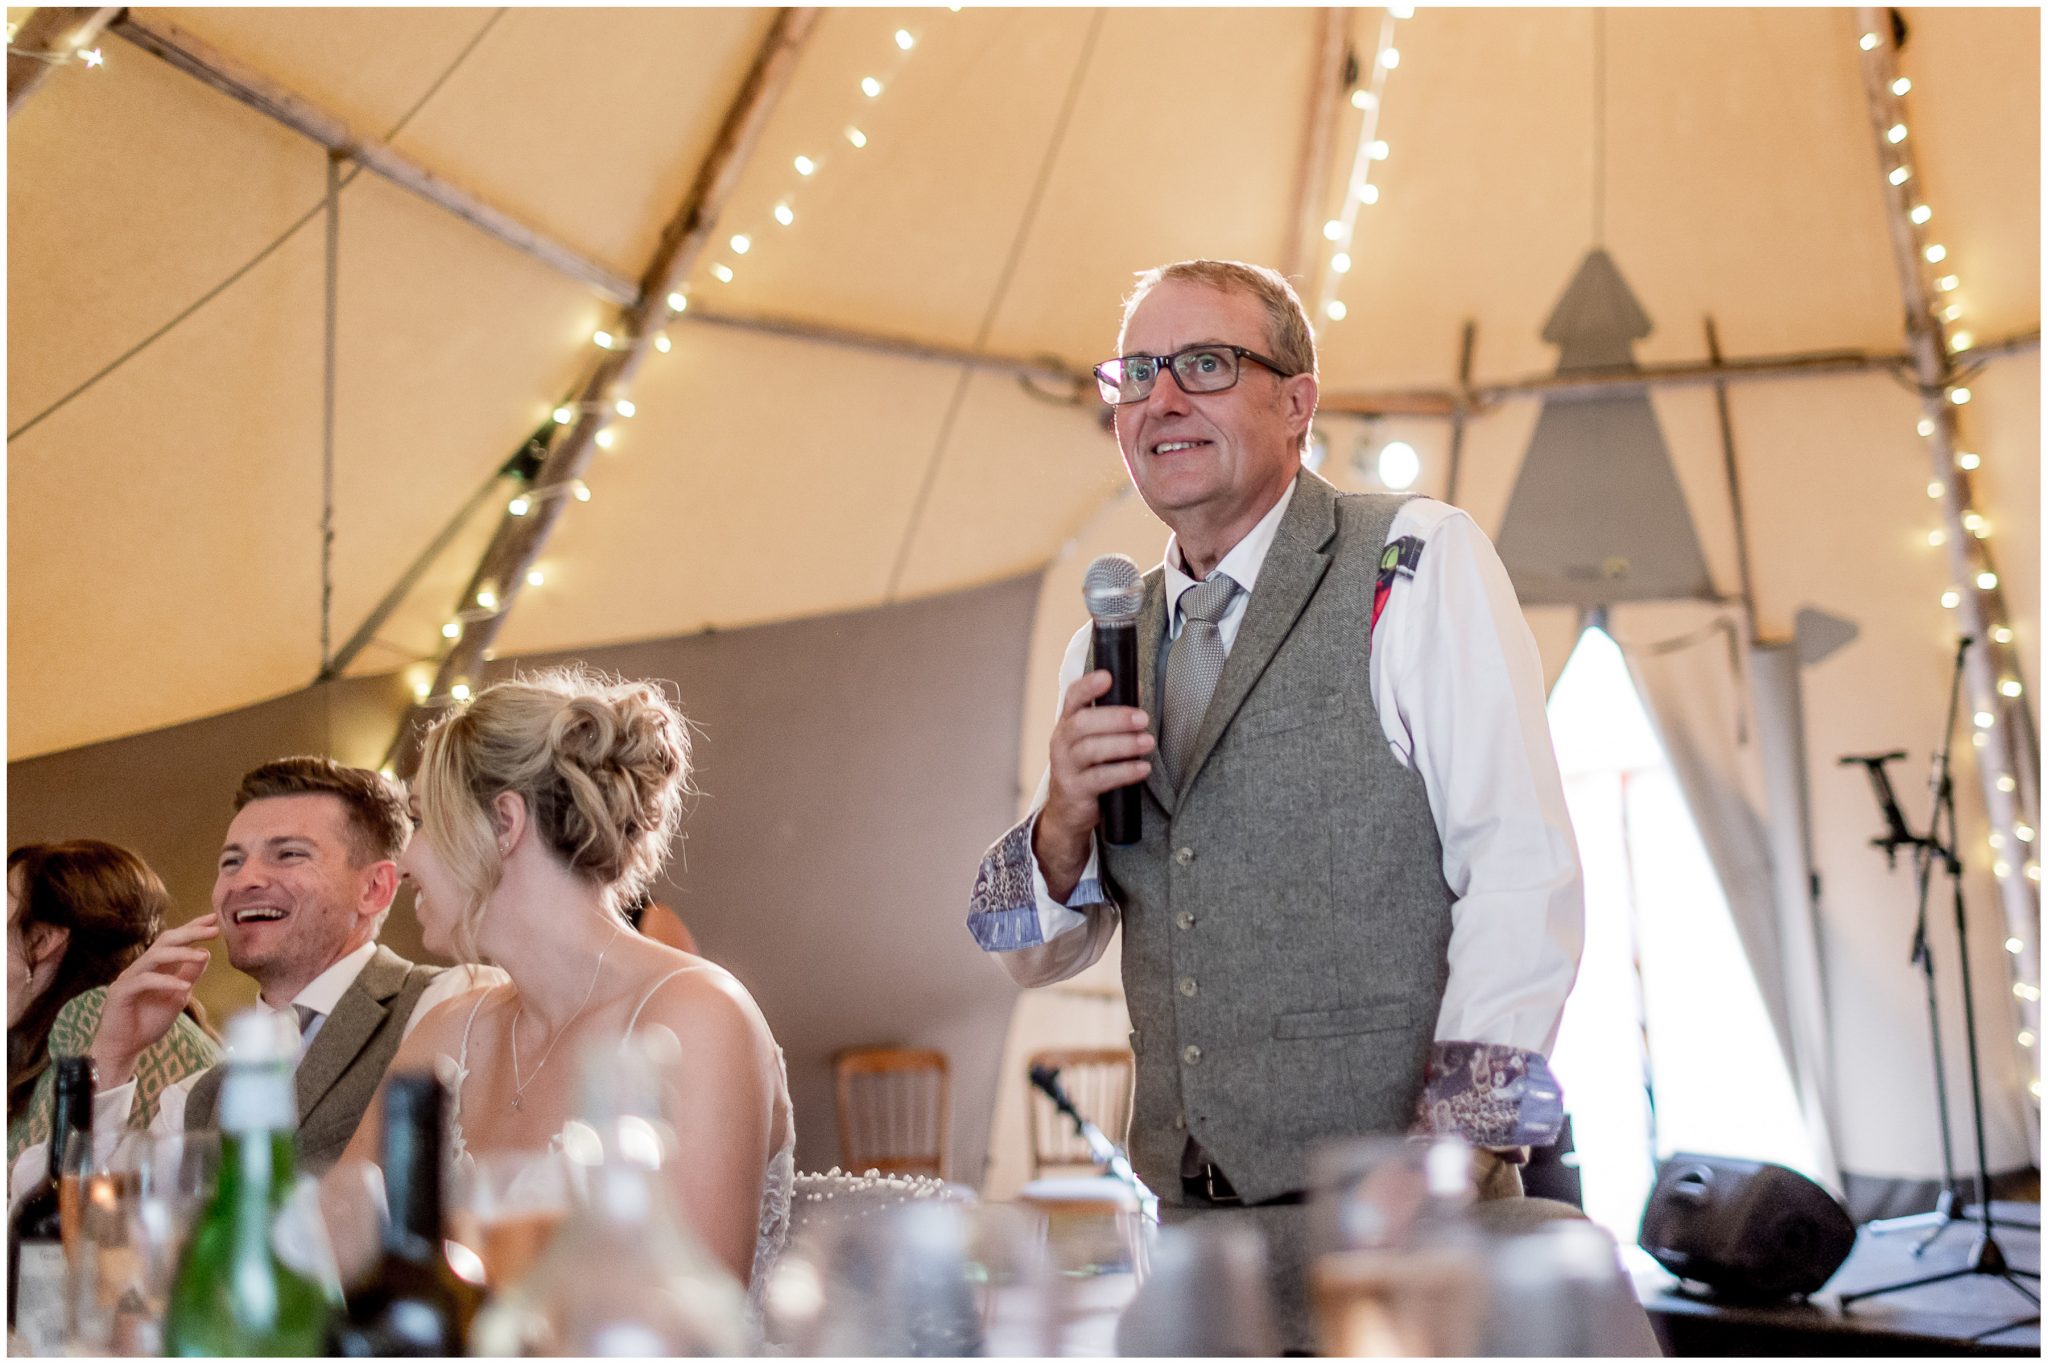 The father of the bride starts the wedding speeches